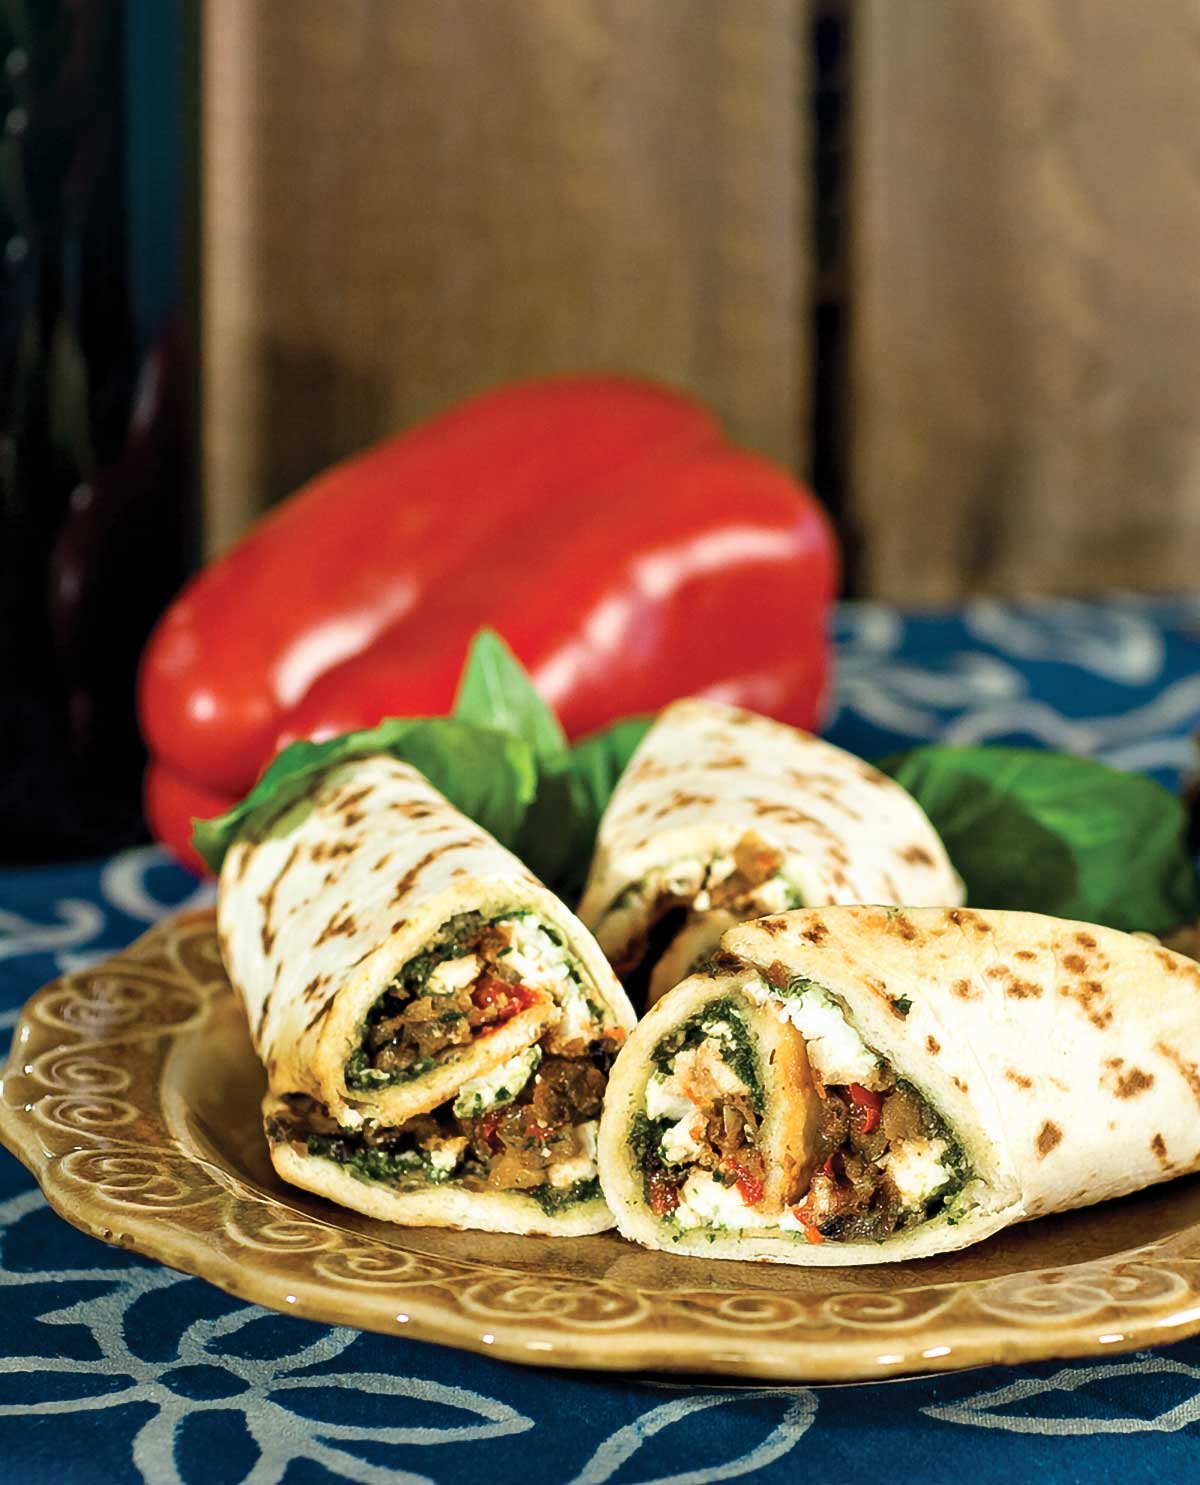 A plate with three eggplant wraps and loose basil leaves, with a whole red pepper in the background